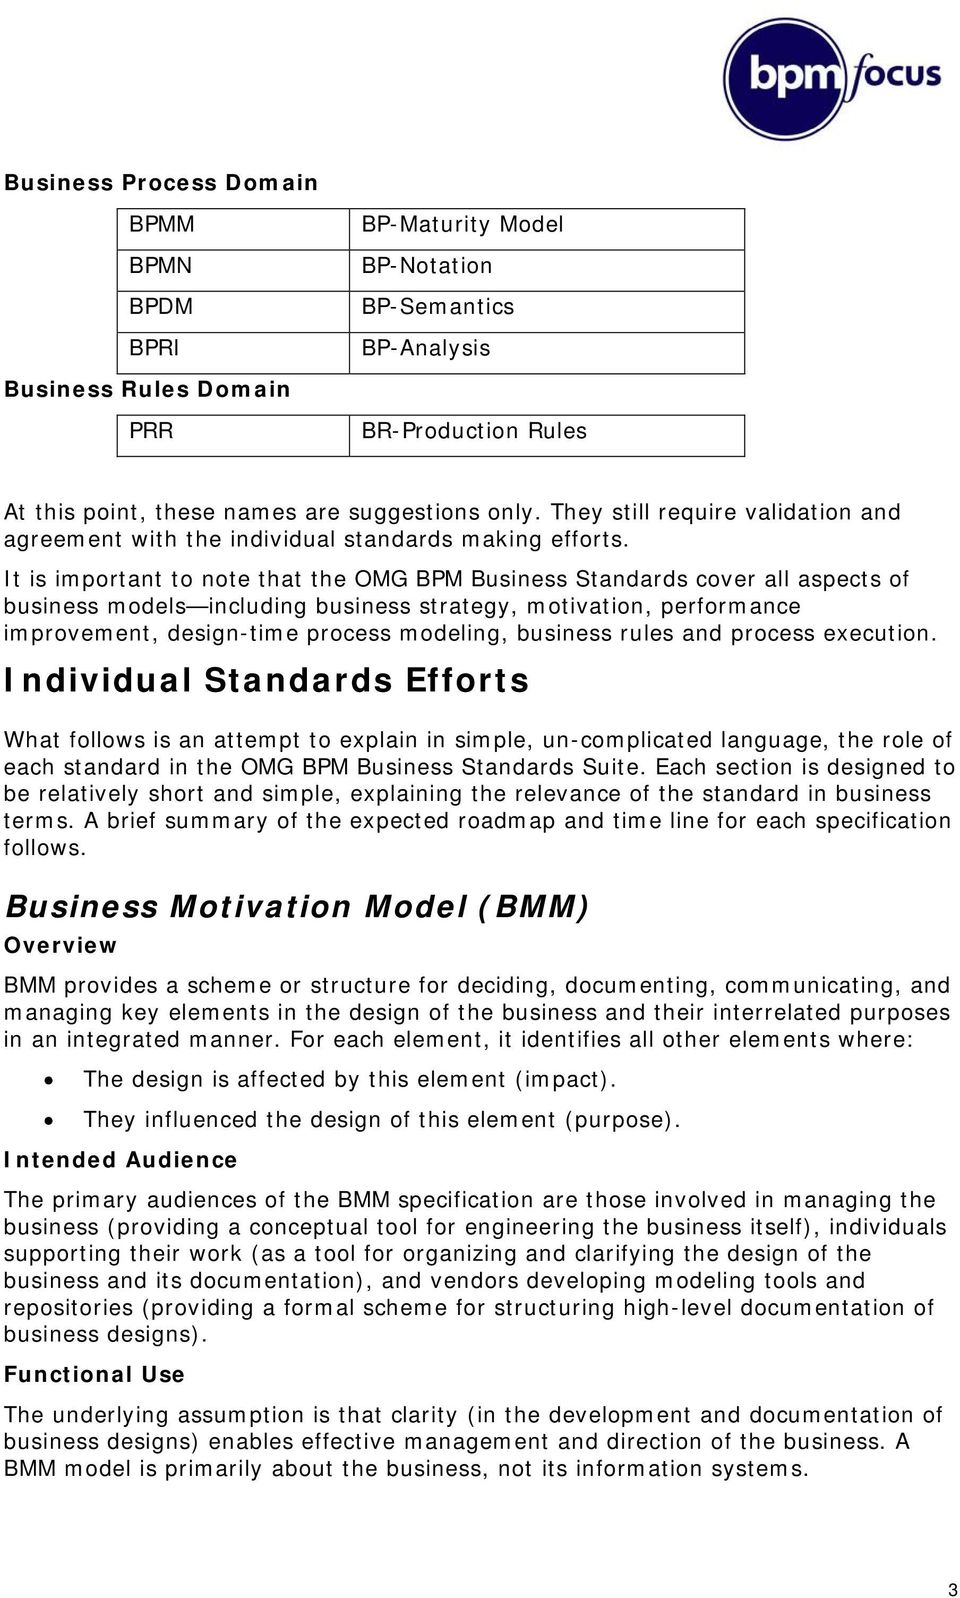 It is important to note that the OMG BPM Business Standards cover all aspects of business models including business strategy, motivation, performance improvement, design-time process modeling,